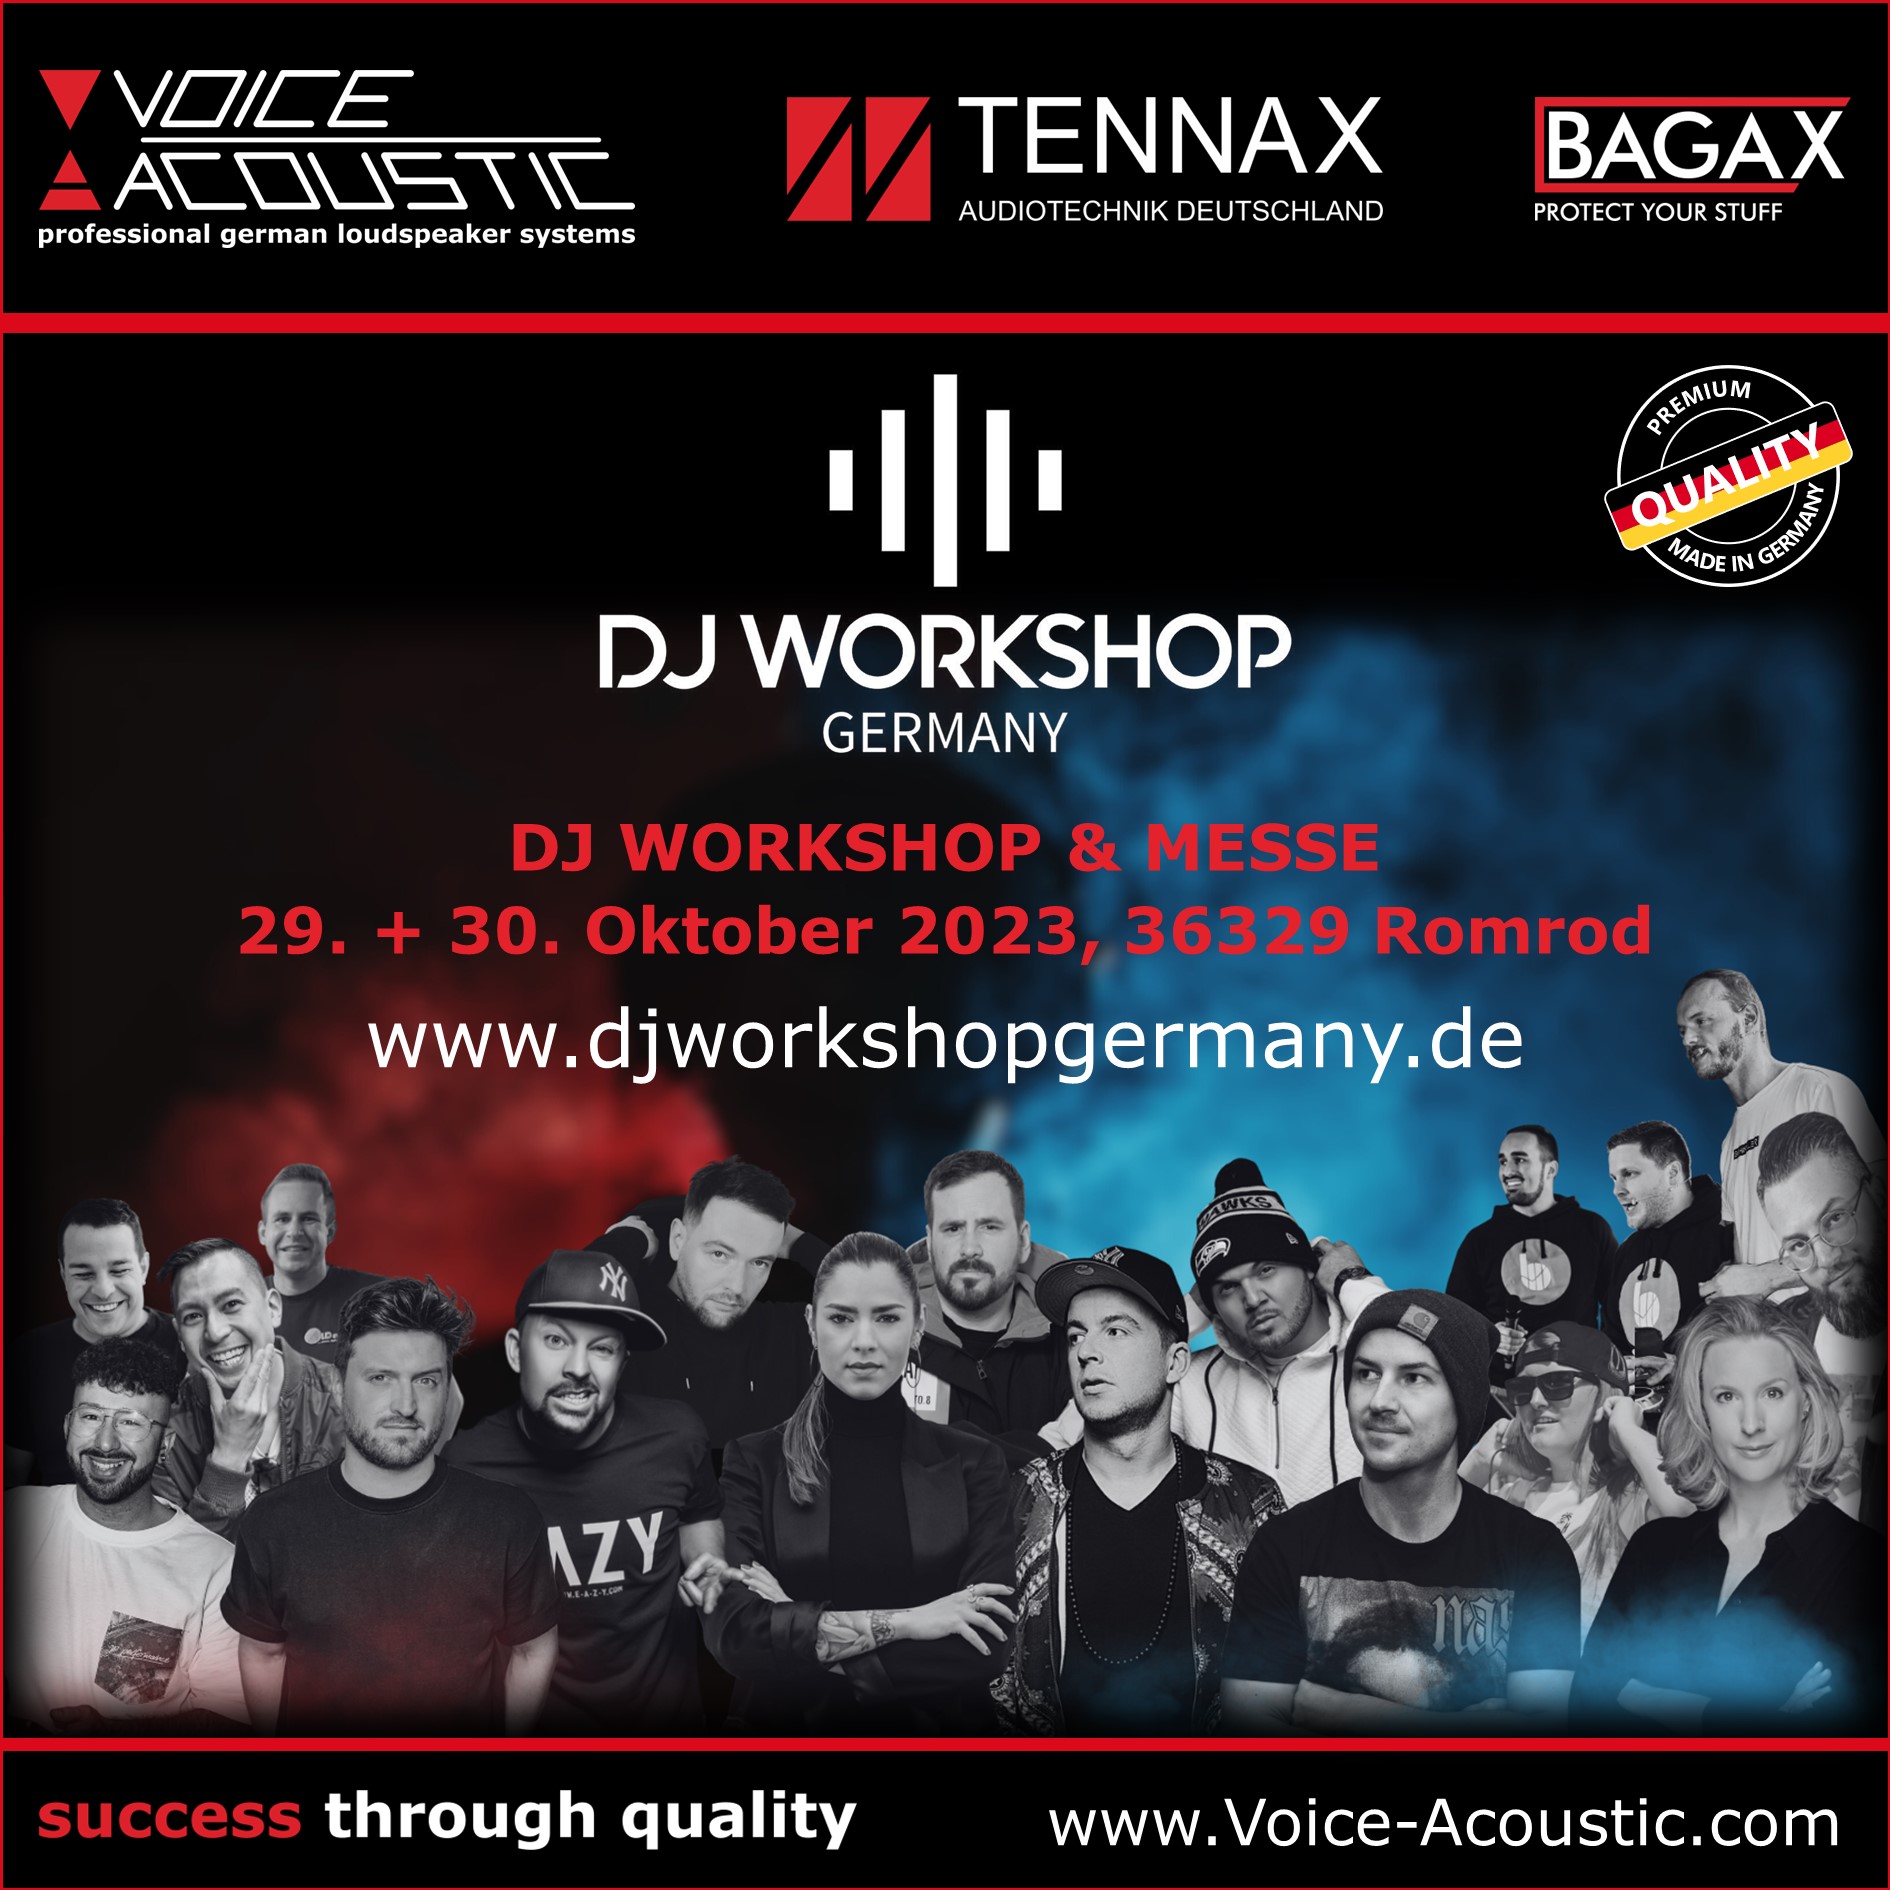 VOICE-ACOUSTIC and TENNAX at the DJ Workshop Germany 2023